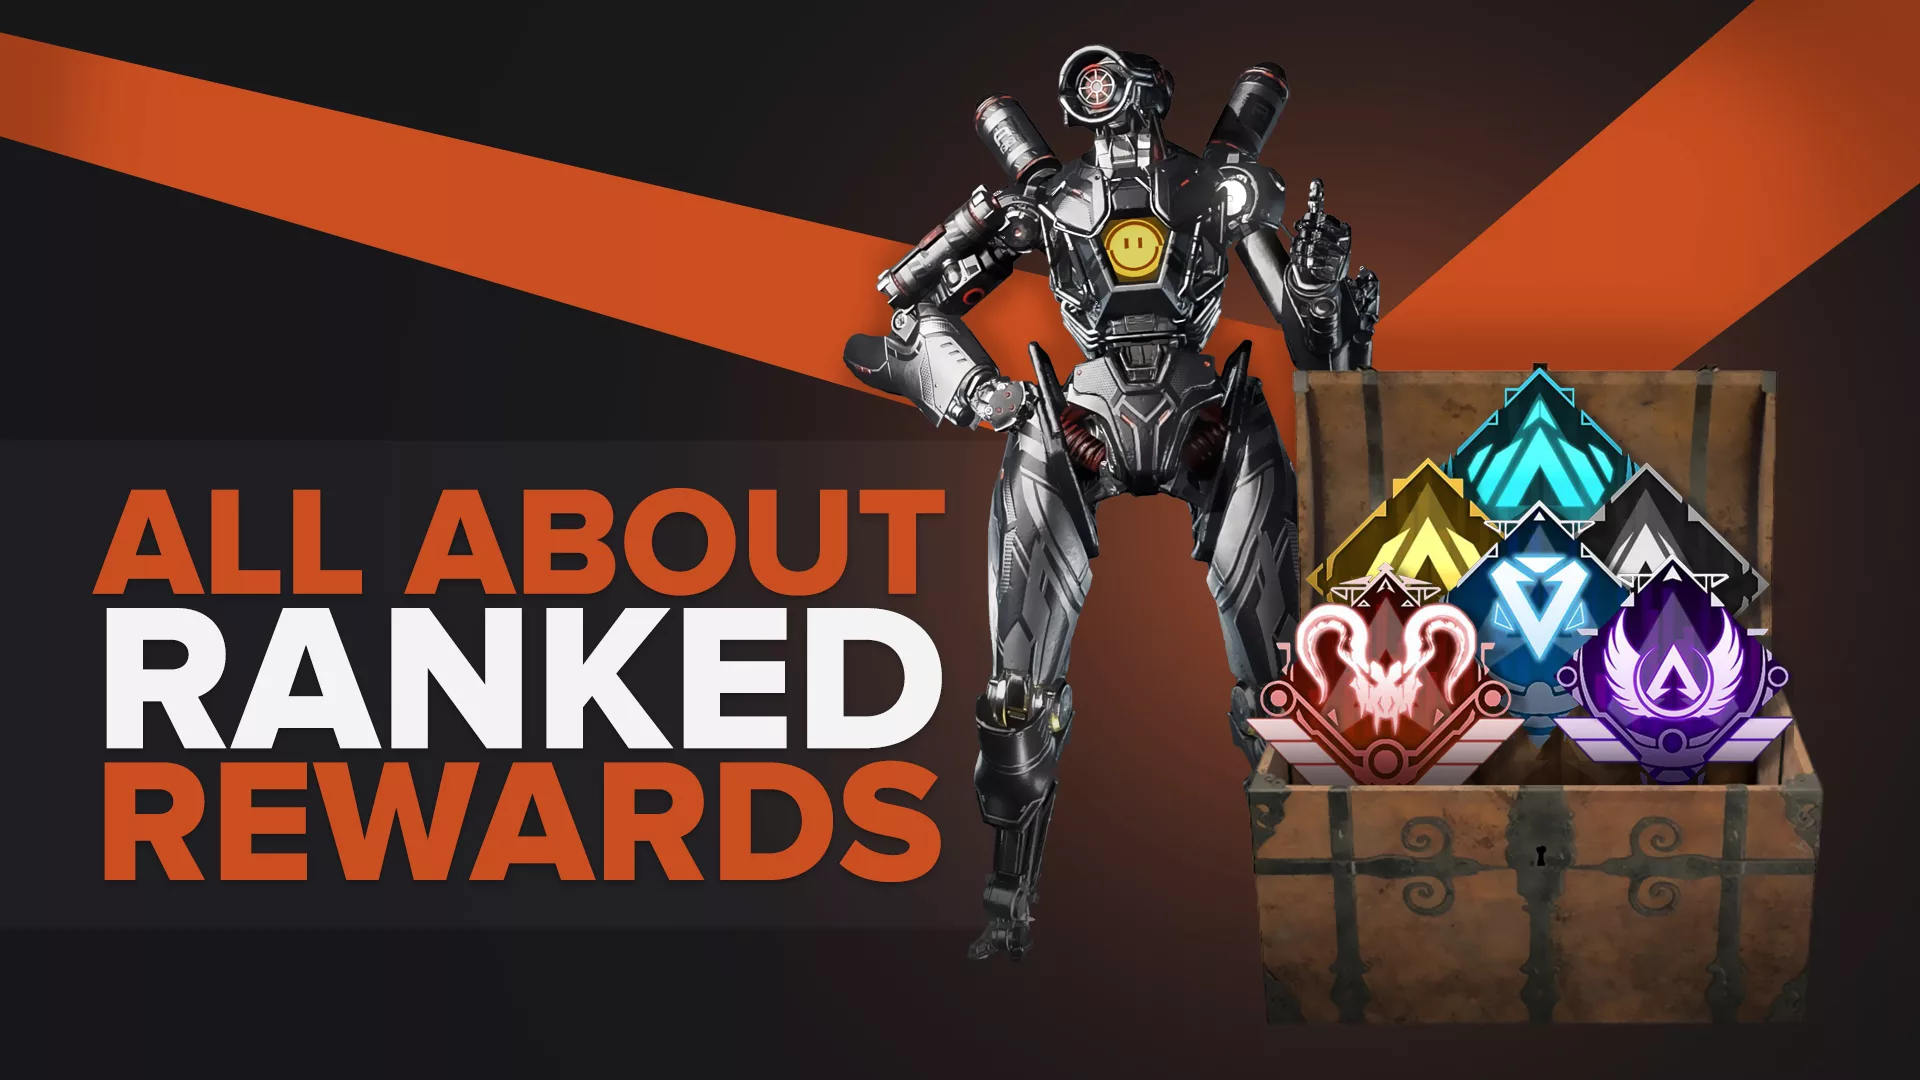 When are you going to get your Ranked Rewards, answered!